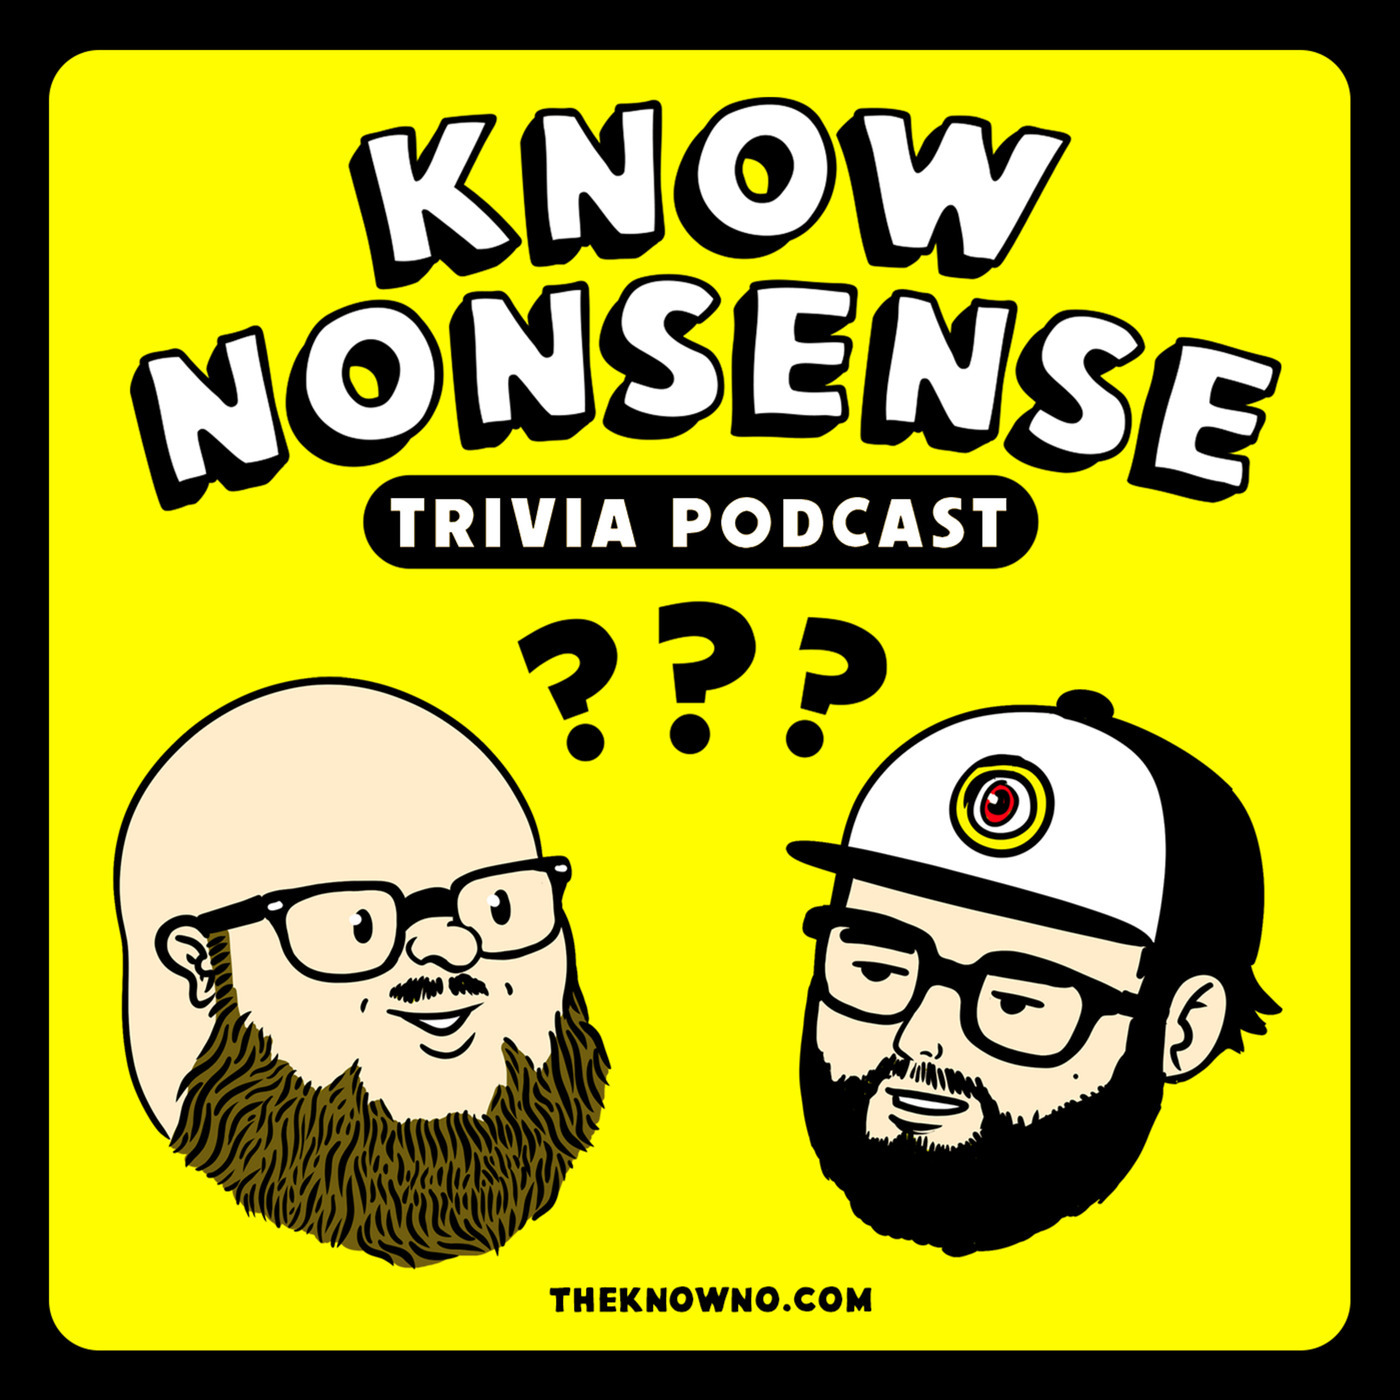 Know Nonsense Trivia Podcast kntng-3: The New Old Appearance